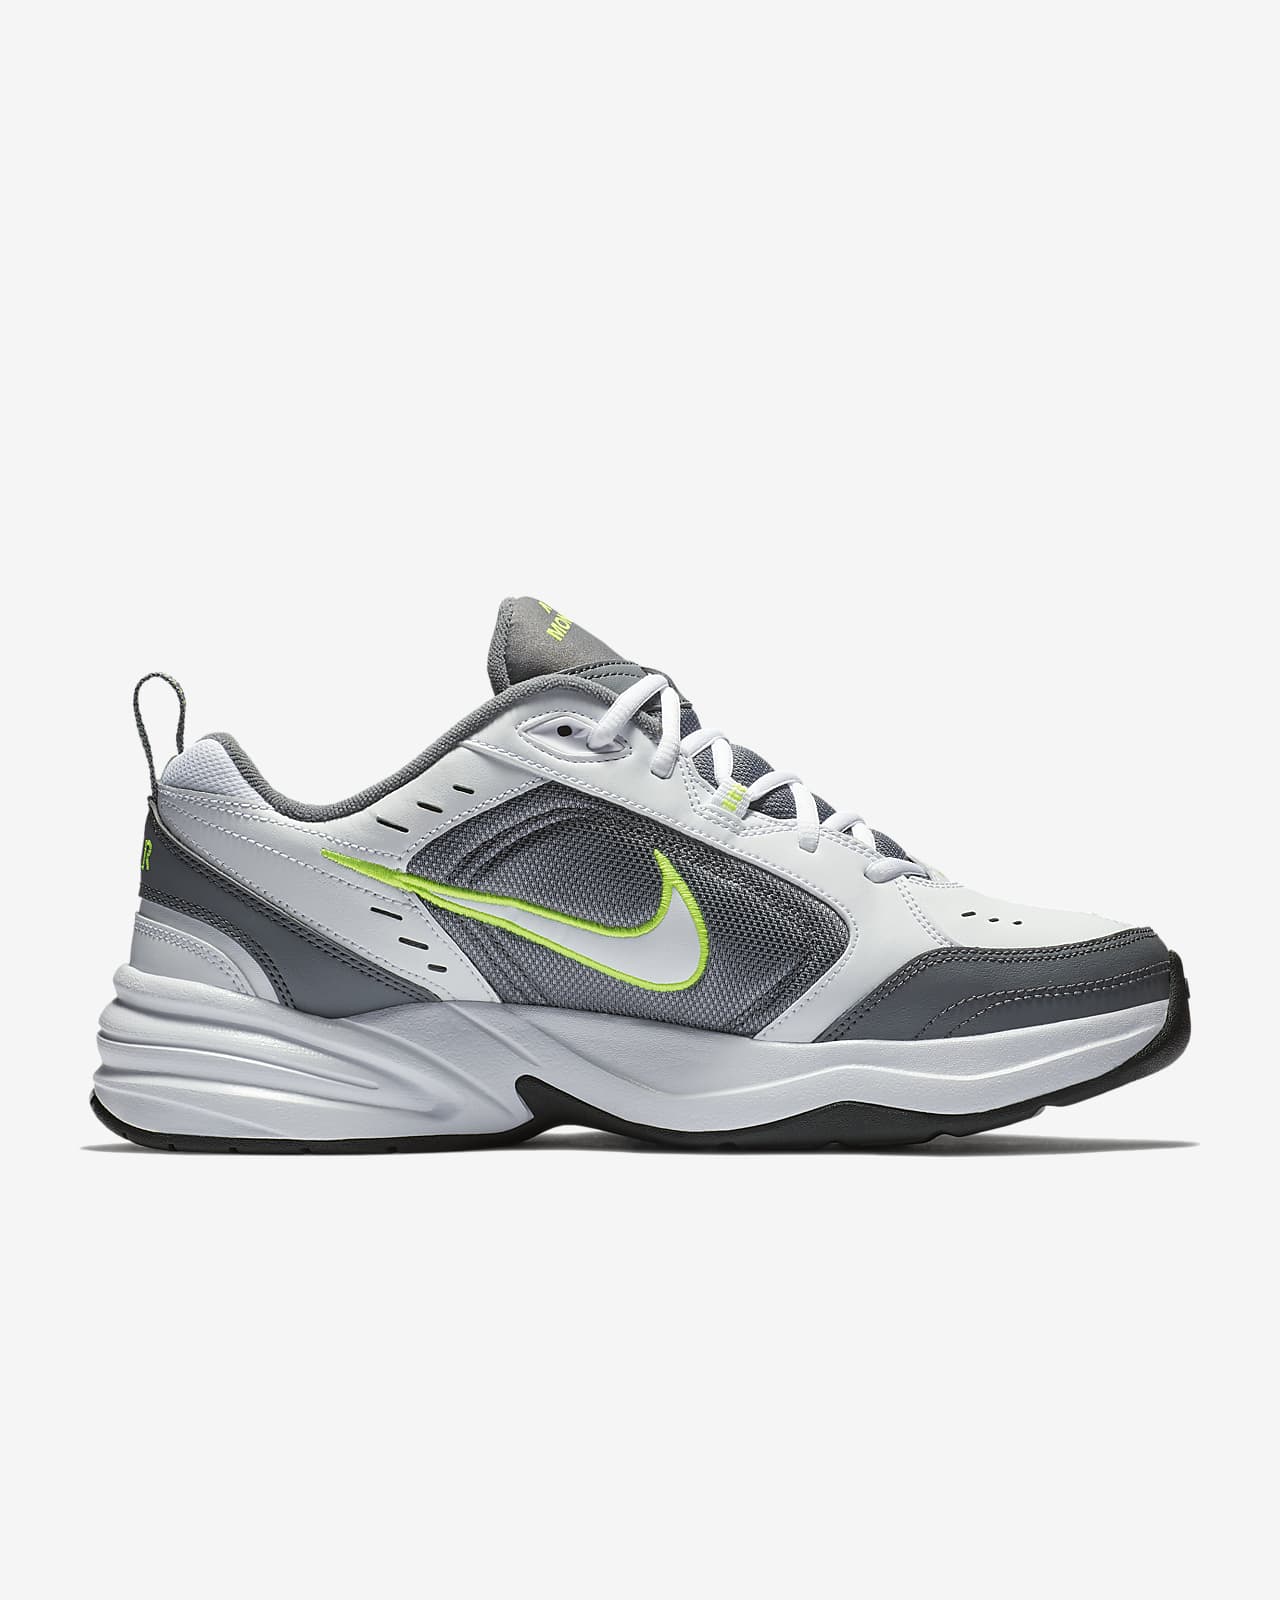 are nike air monarch good for running